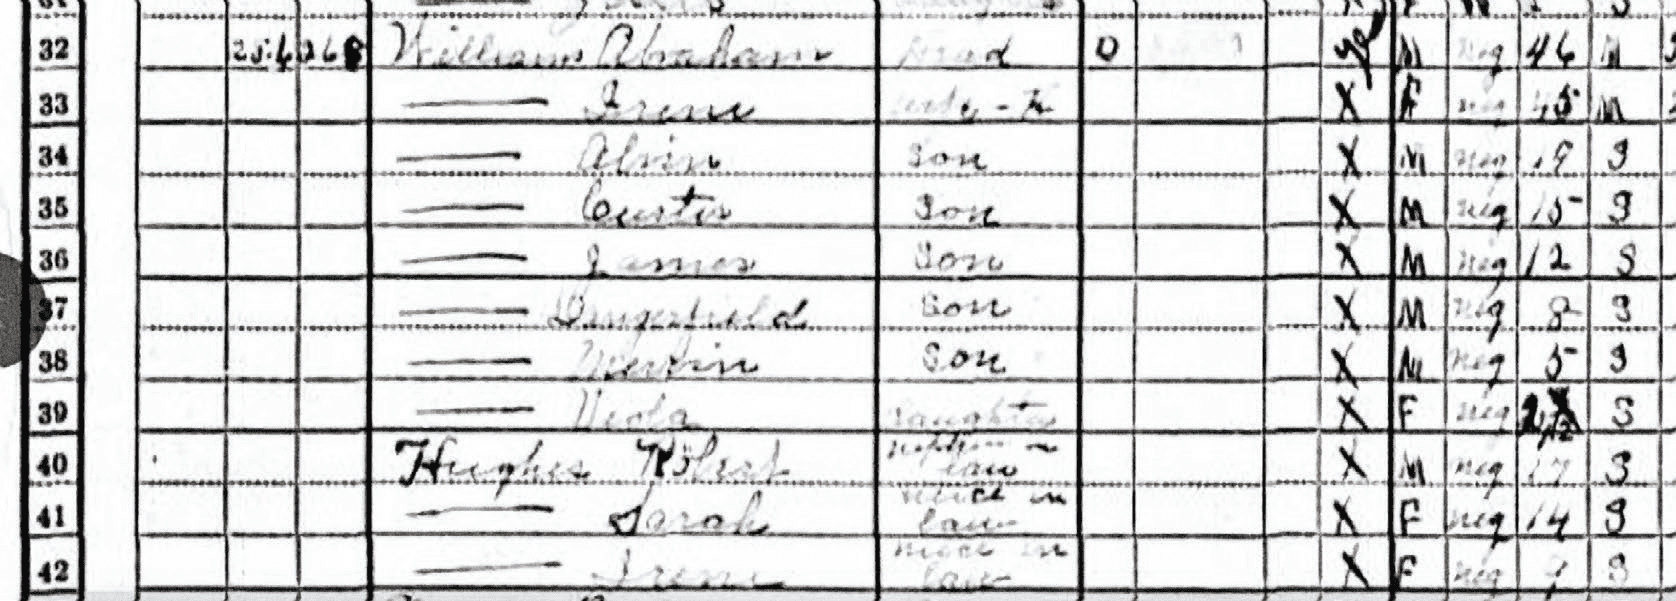 Irene Day Williams, Abraham Williams, and their family were recorded in the 1930 Census-Leesburg District. A nephew and 2 nieces were living with them. Image from Ancestry.com.